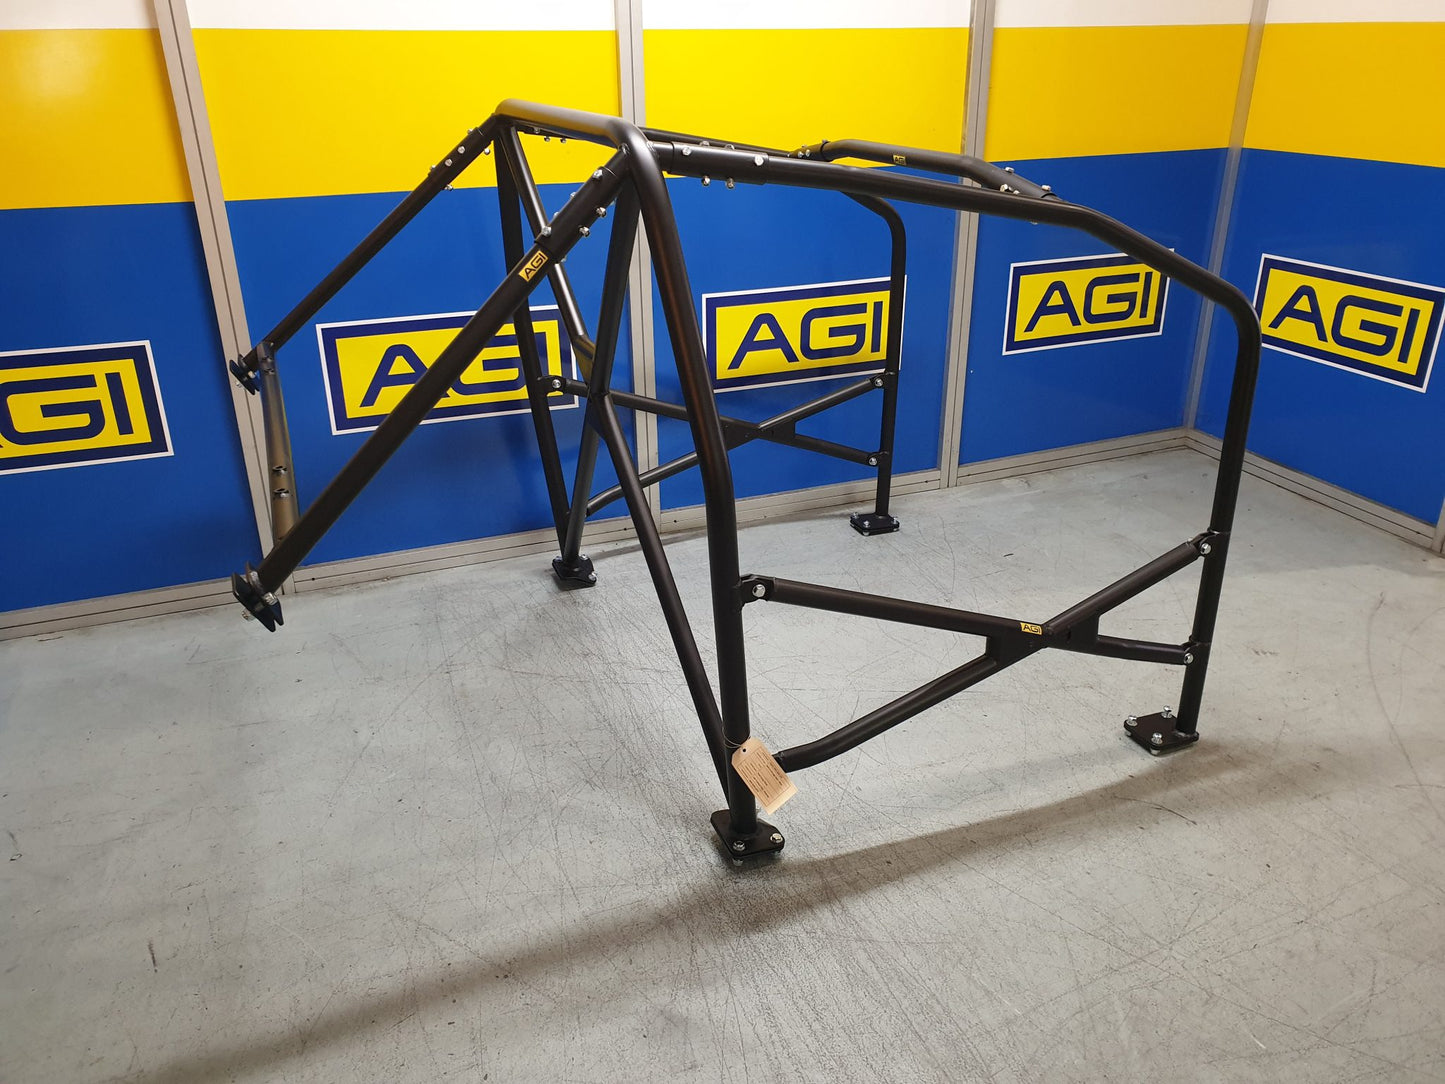 AGI roll cage VW GOLF MK5 – FULL CAGE 6PT BOLT IN (state level meetings, double door bars)